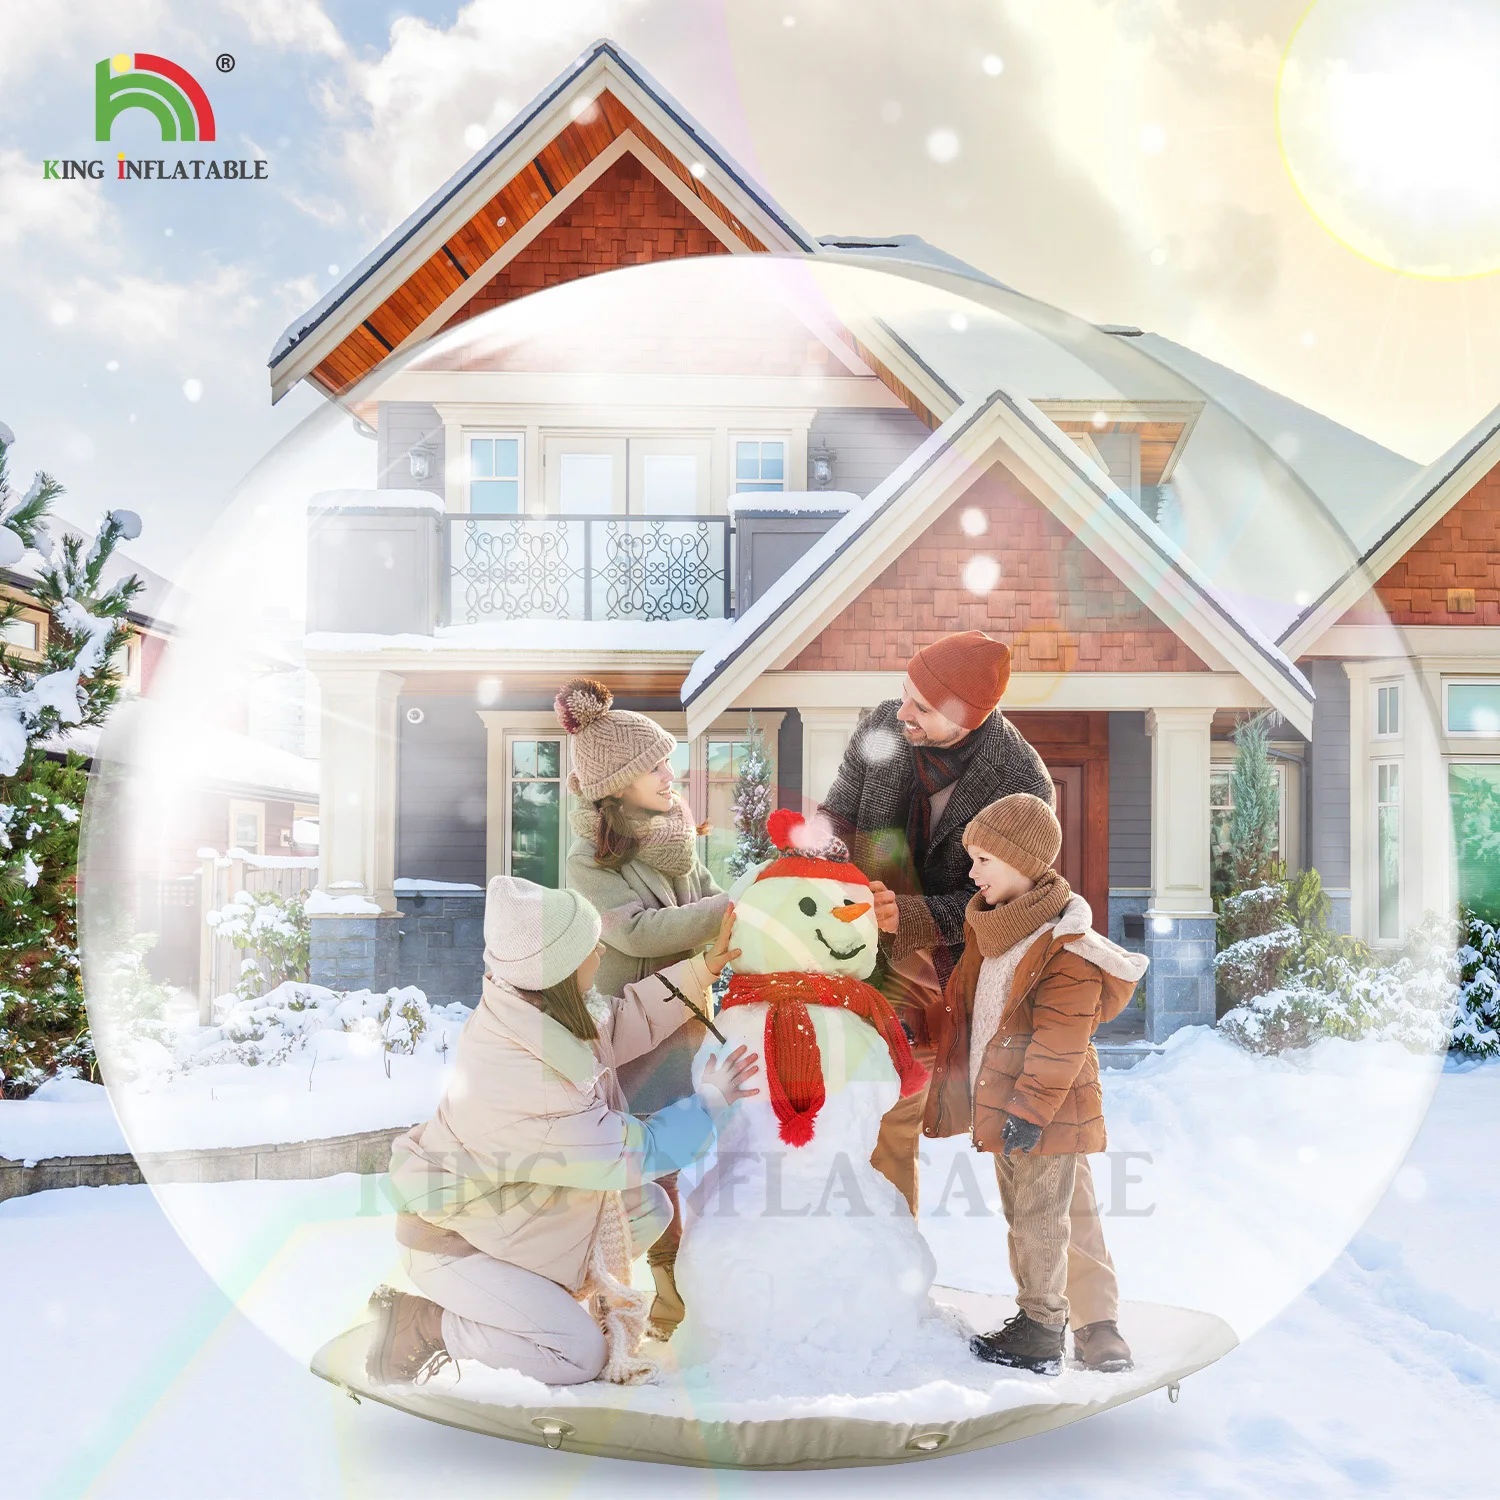 10ft/3m PVC Transparent Bubble Tent Giant Inflatable Snowball Christmas Snow Globe Dome Xmas Outdoor Decoration With Blower life size 2m 3m 4m inflatable christmas snow globe for decoration snow globe outdoor for photo booth go inside advertising